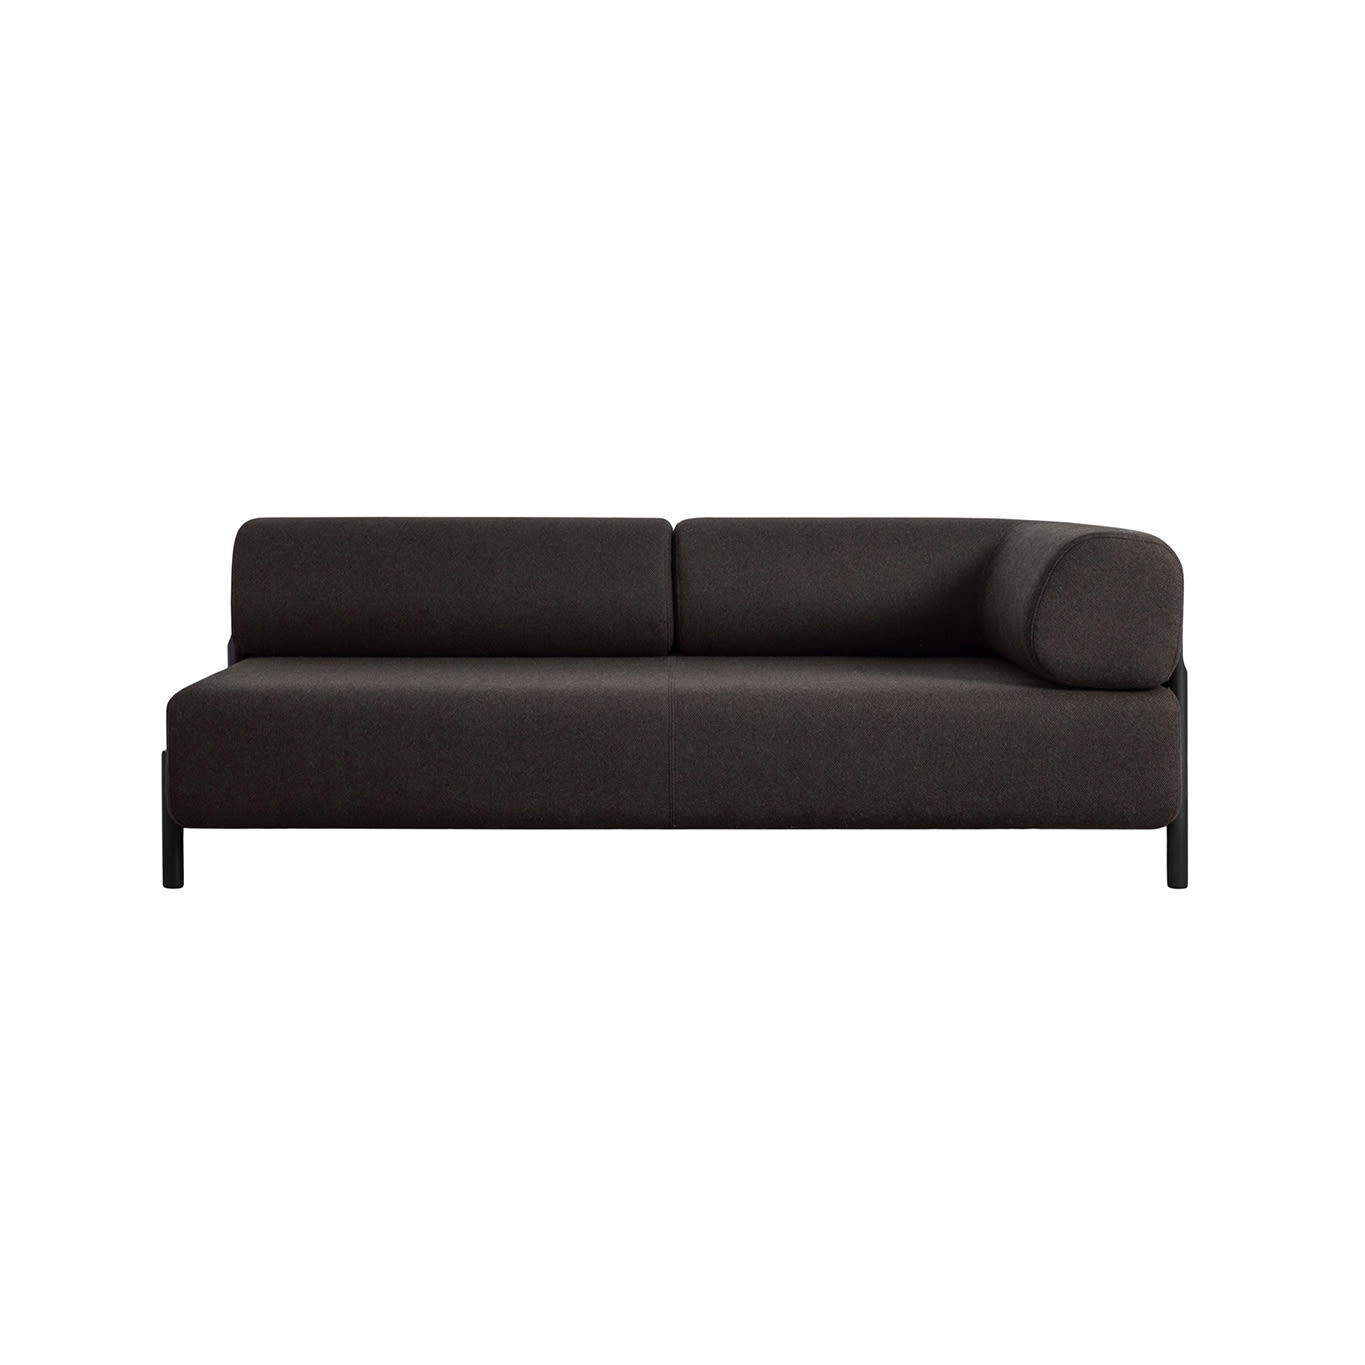 2-seater Sofa Chaise Right, Brown-Black